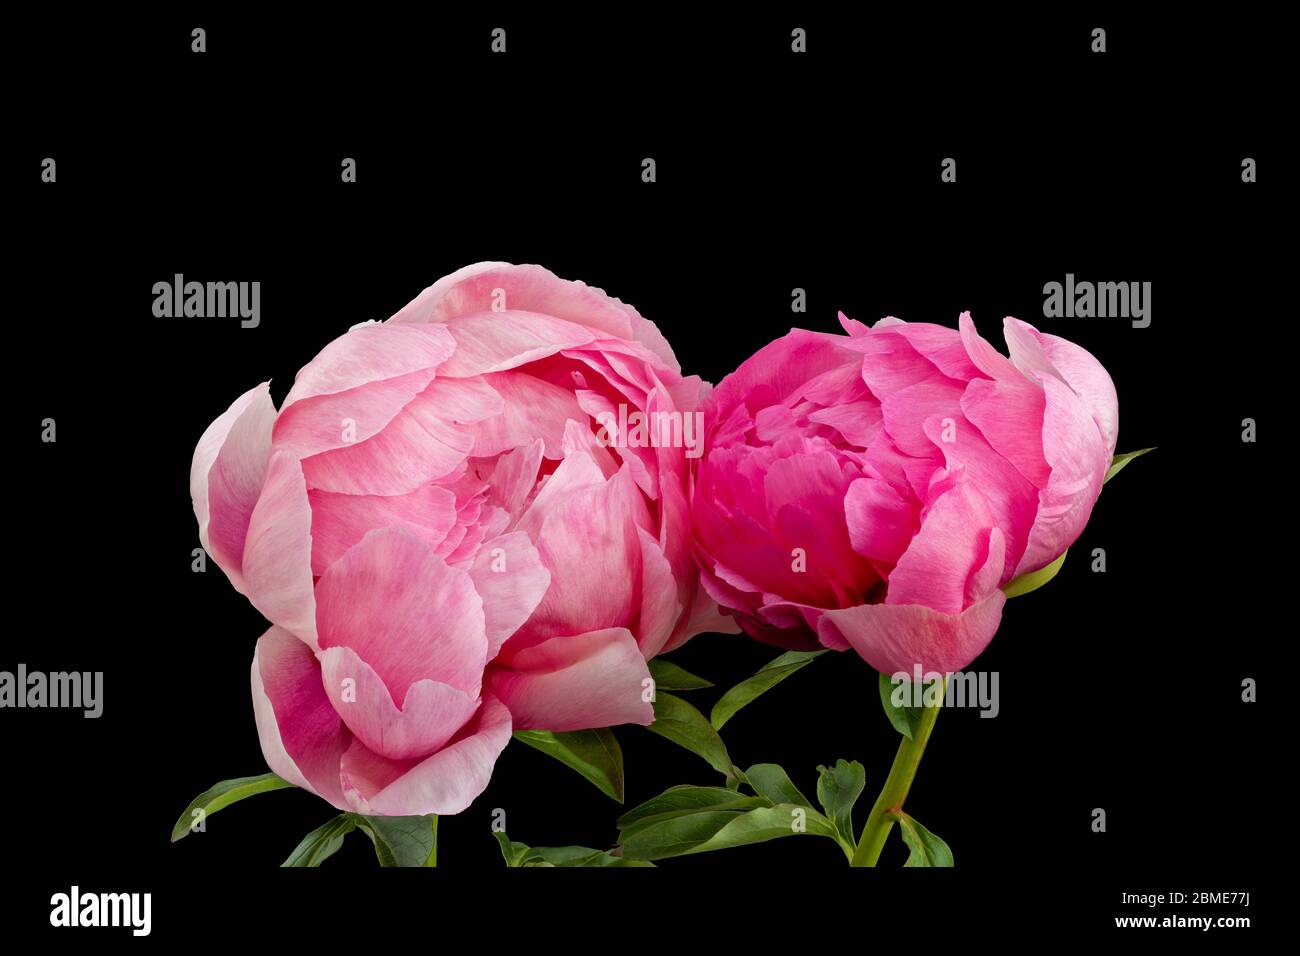 Isolated pink young peony blossom pair macro on black background with stem and green leaves Stock Photo